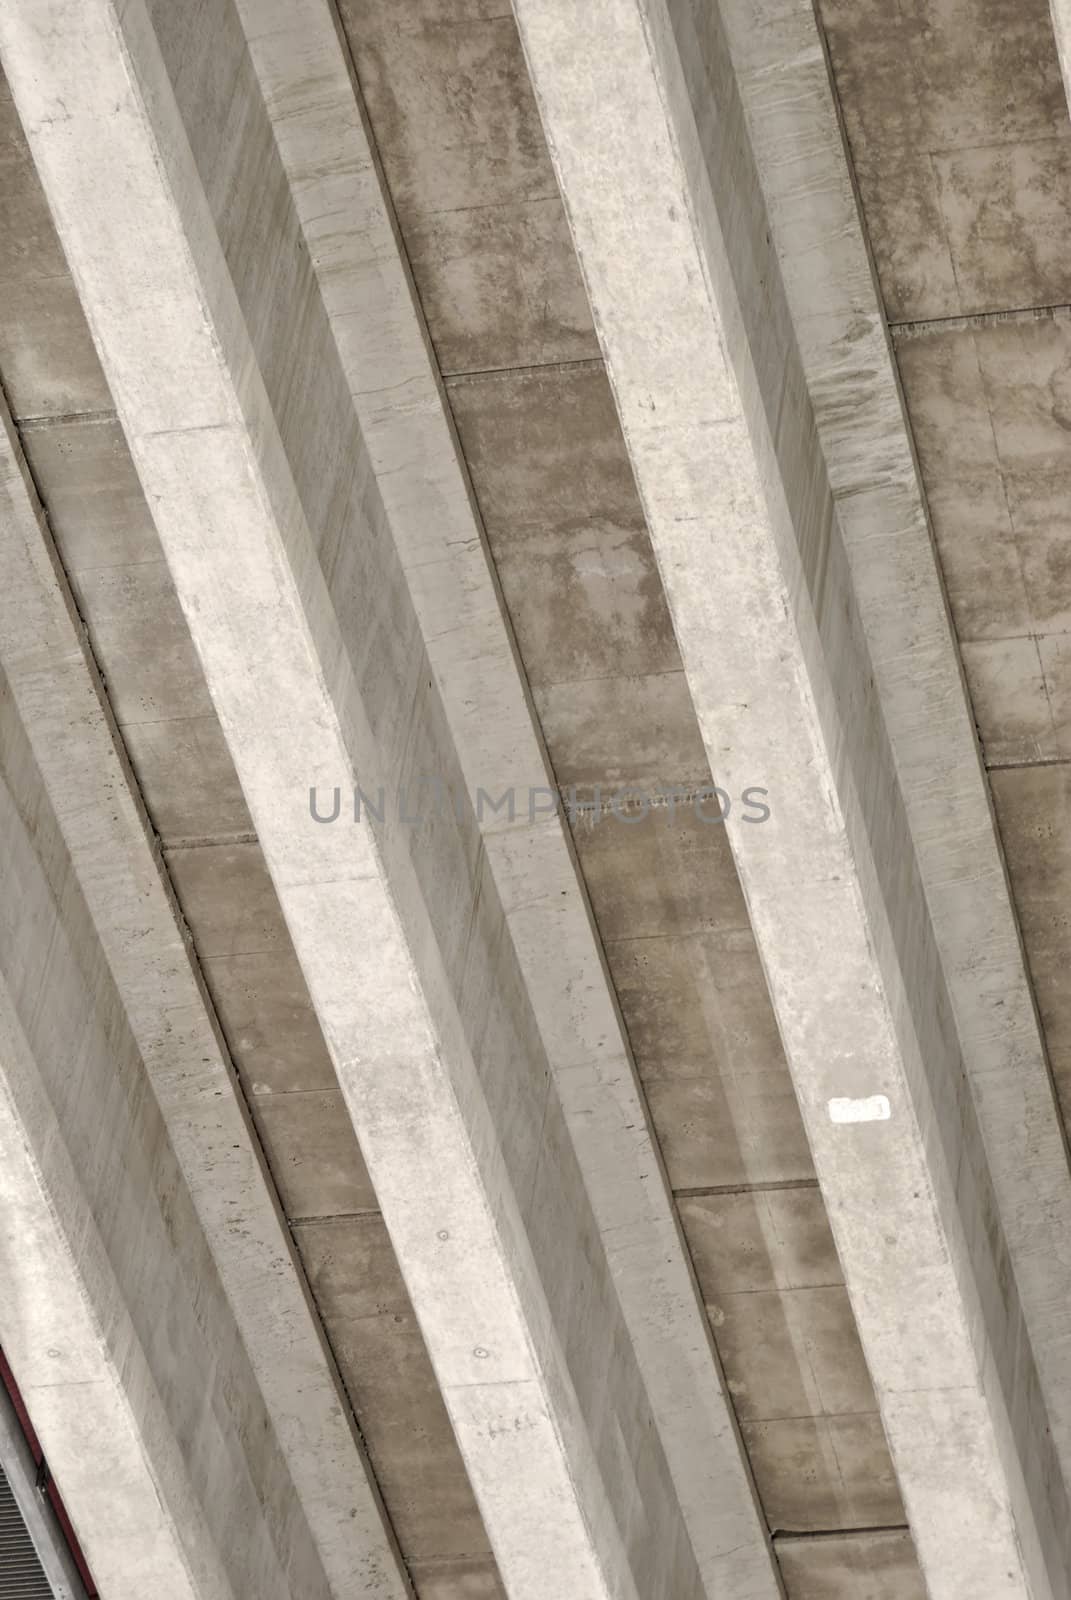 Underside of a highway bridge, forming abstract concrete stripes.
